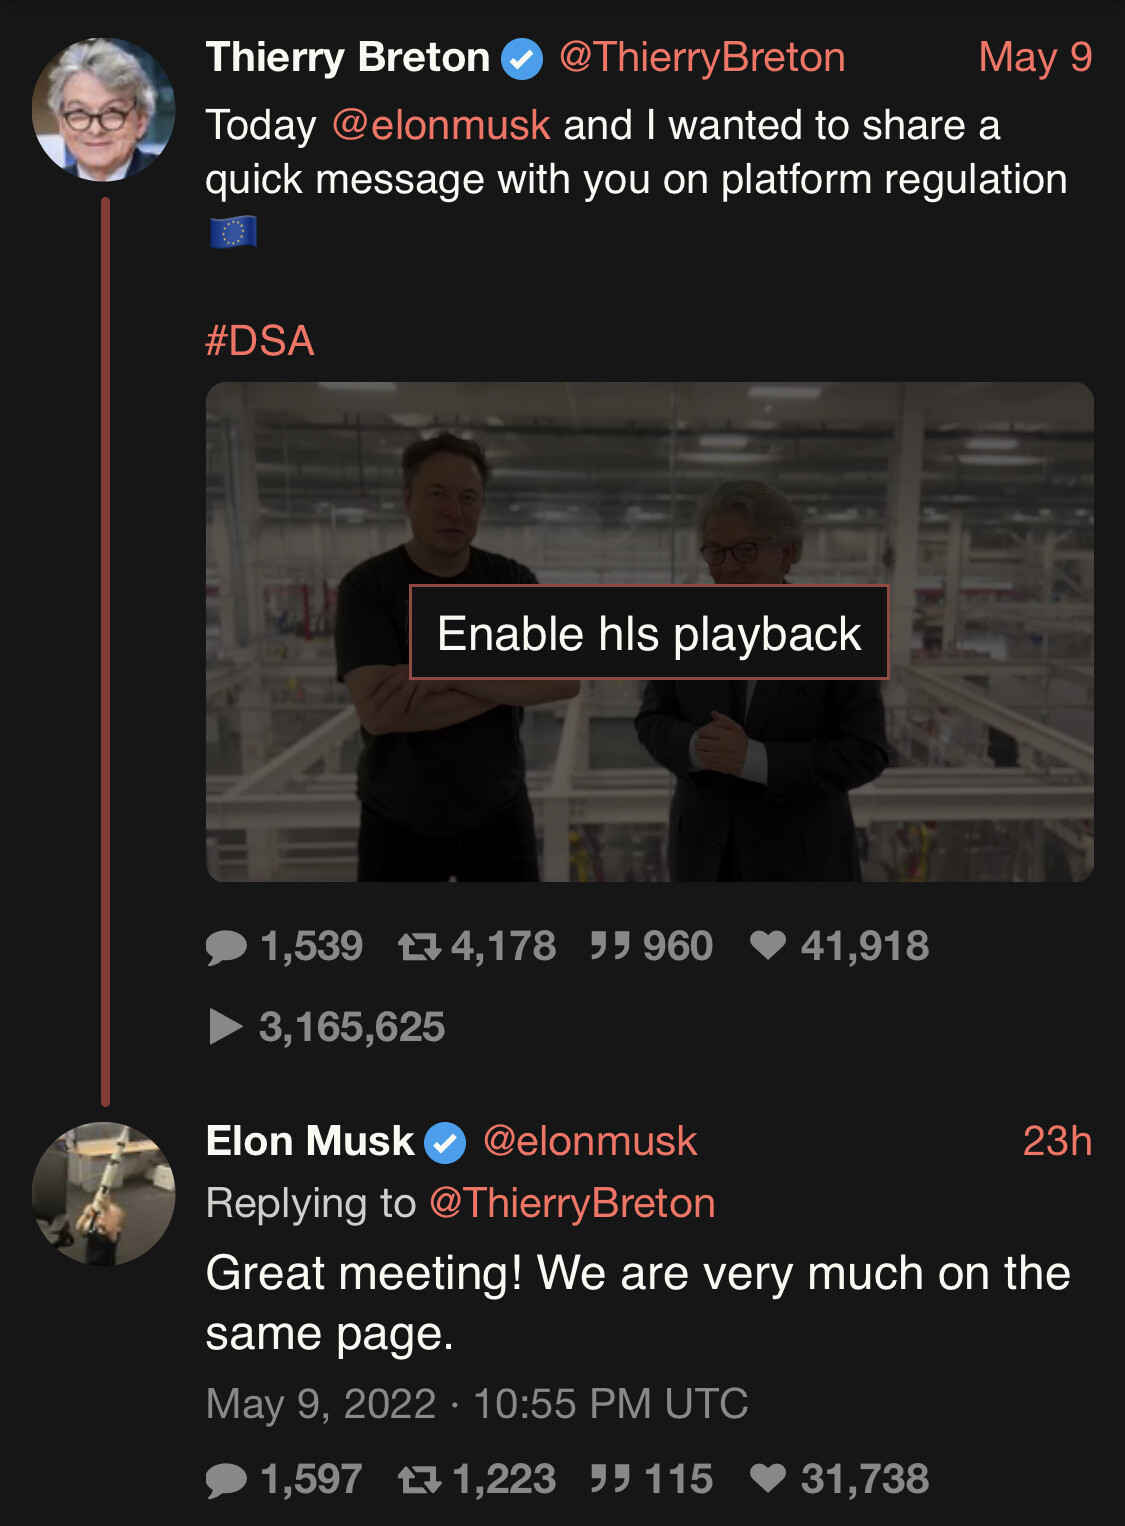 Elon Musk: Great meeting! We are very much on the same page.